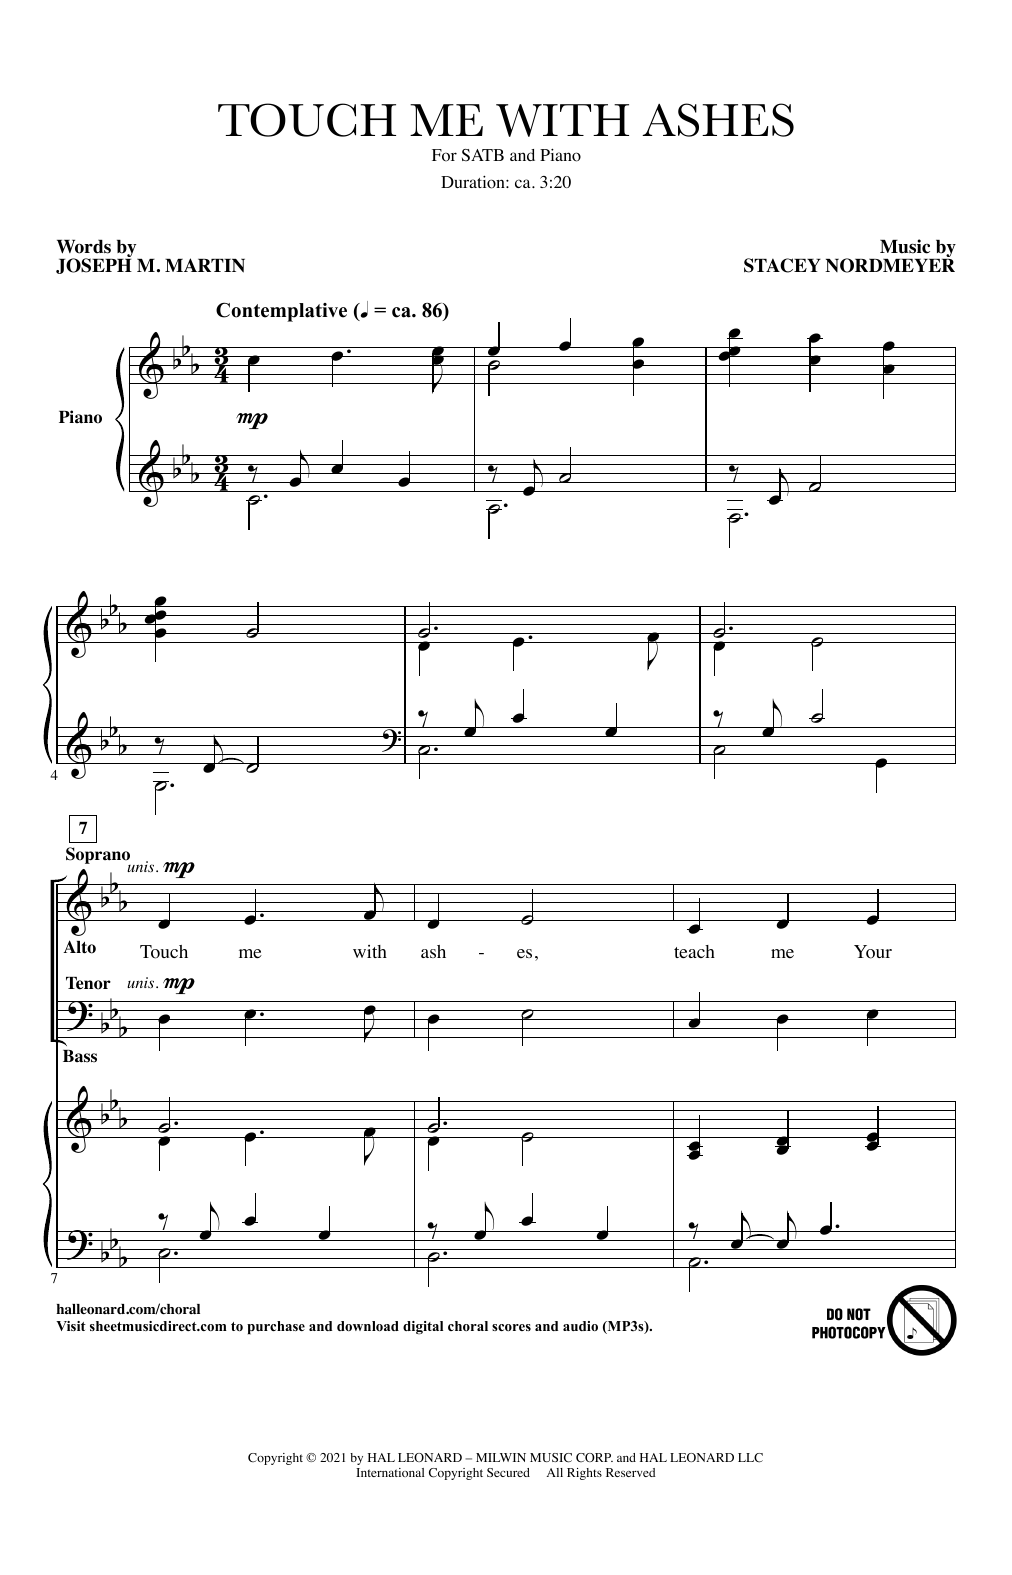 Touch Me With Ashes (SATB Choir) von Joseph M. Martin and Stacey Nordmeyer